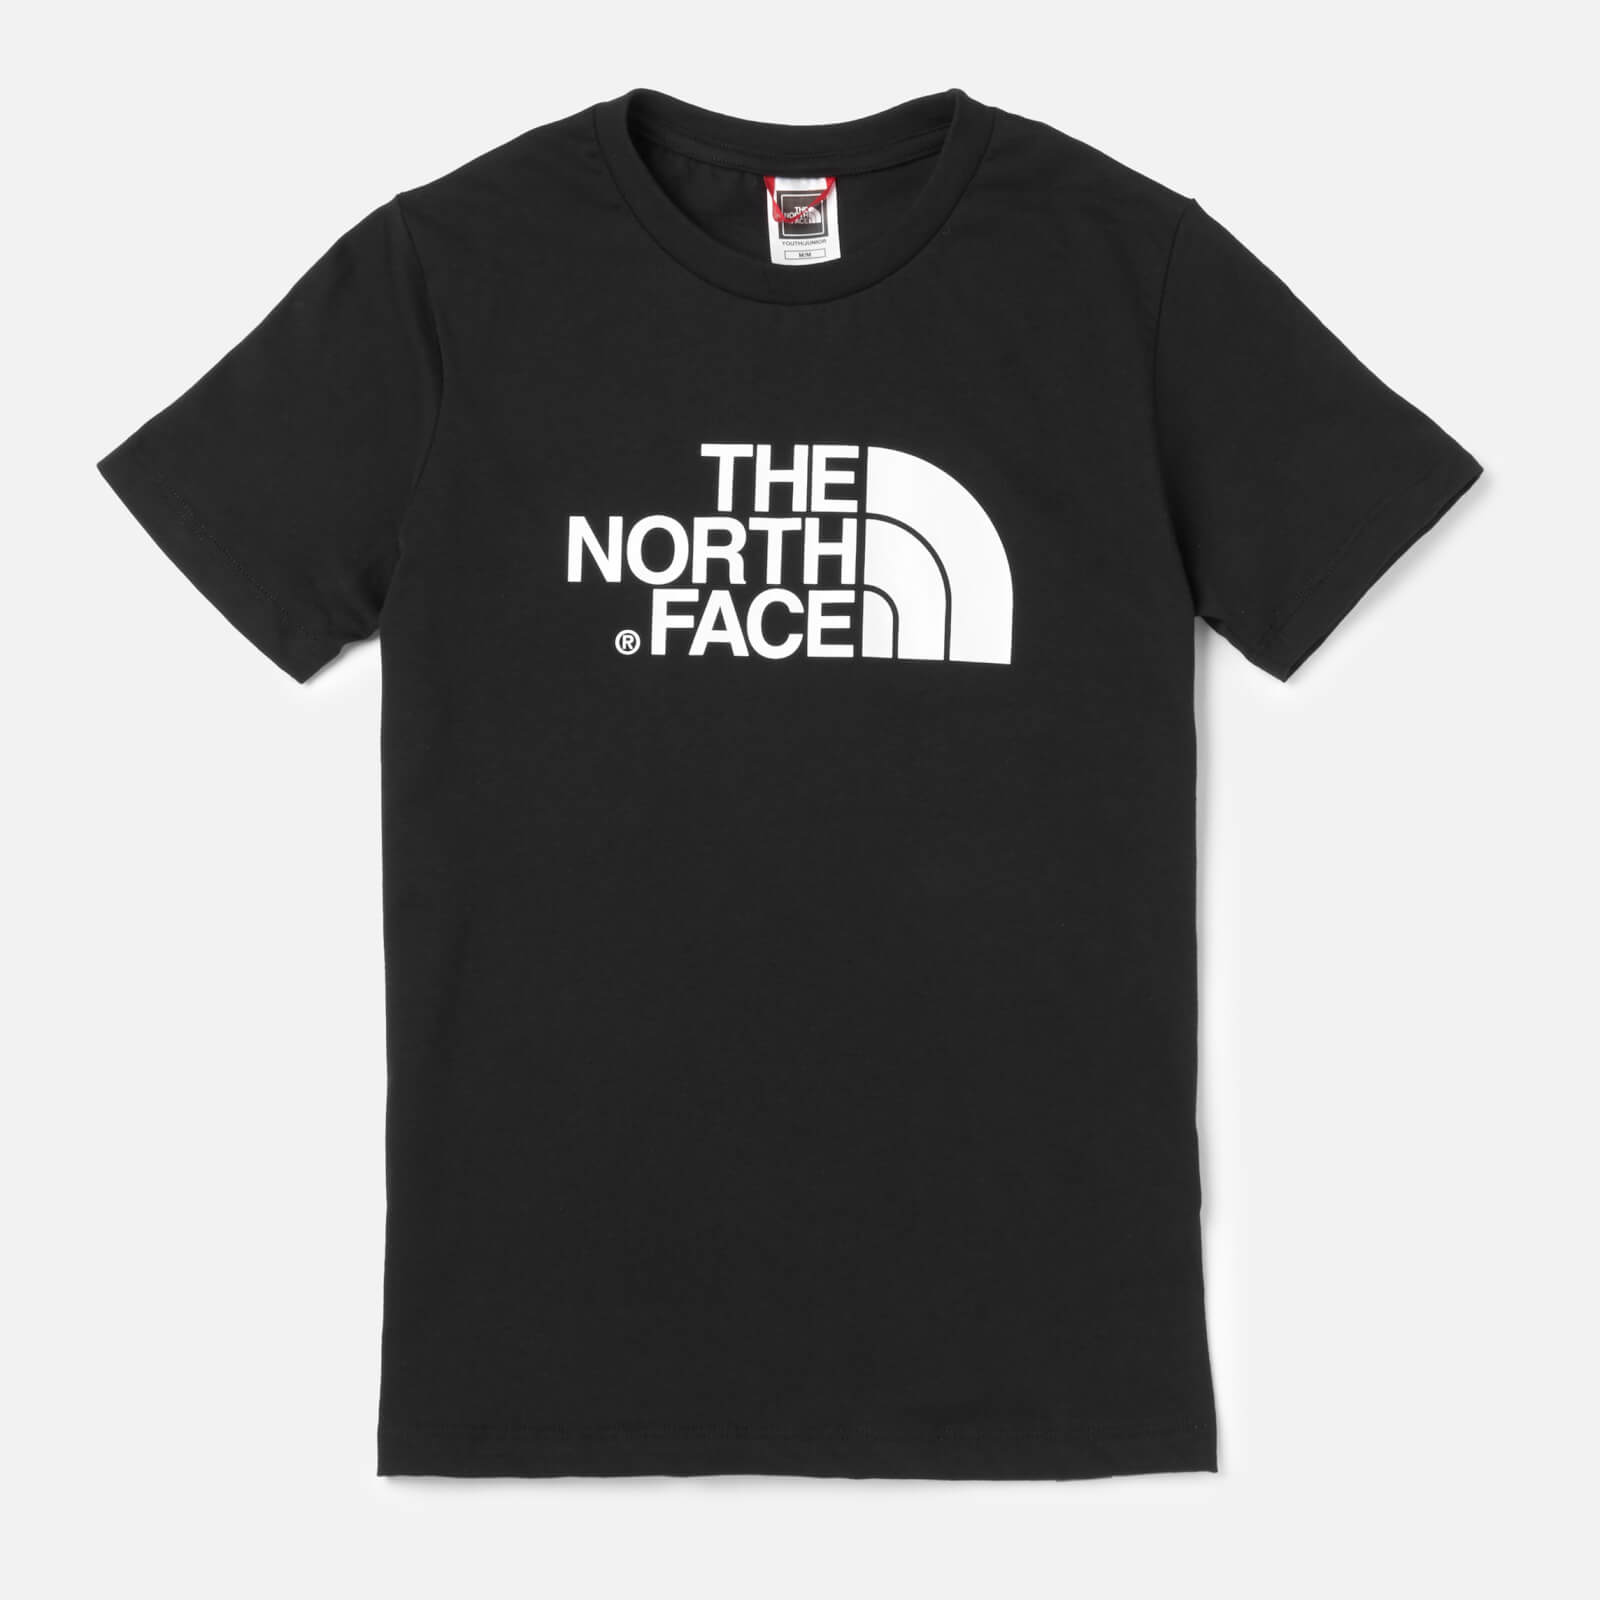 The North Face Boys' Youth Short Sleeve Easy Tee - Black - 5-6 Years